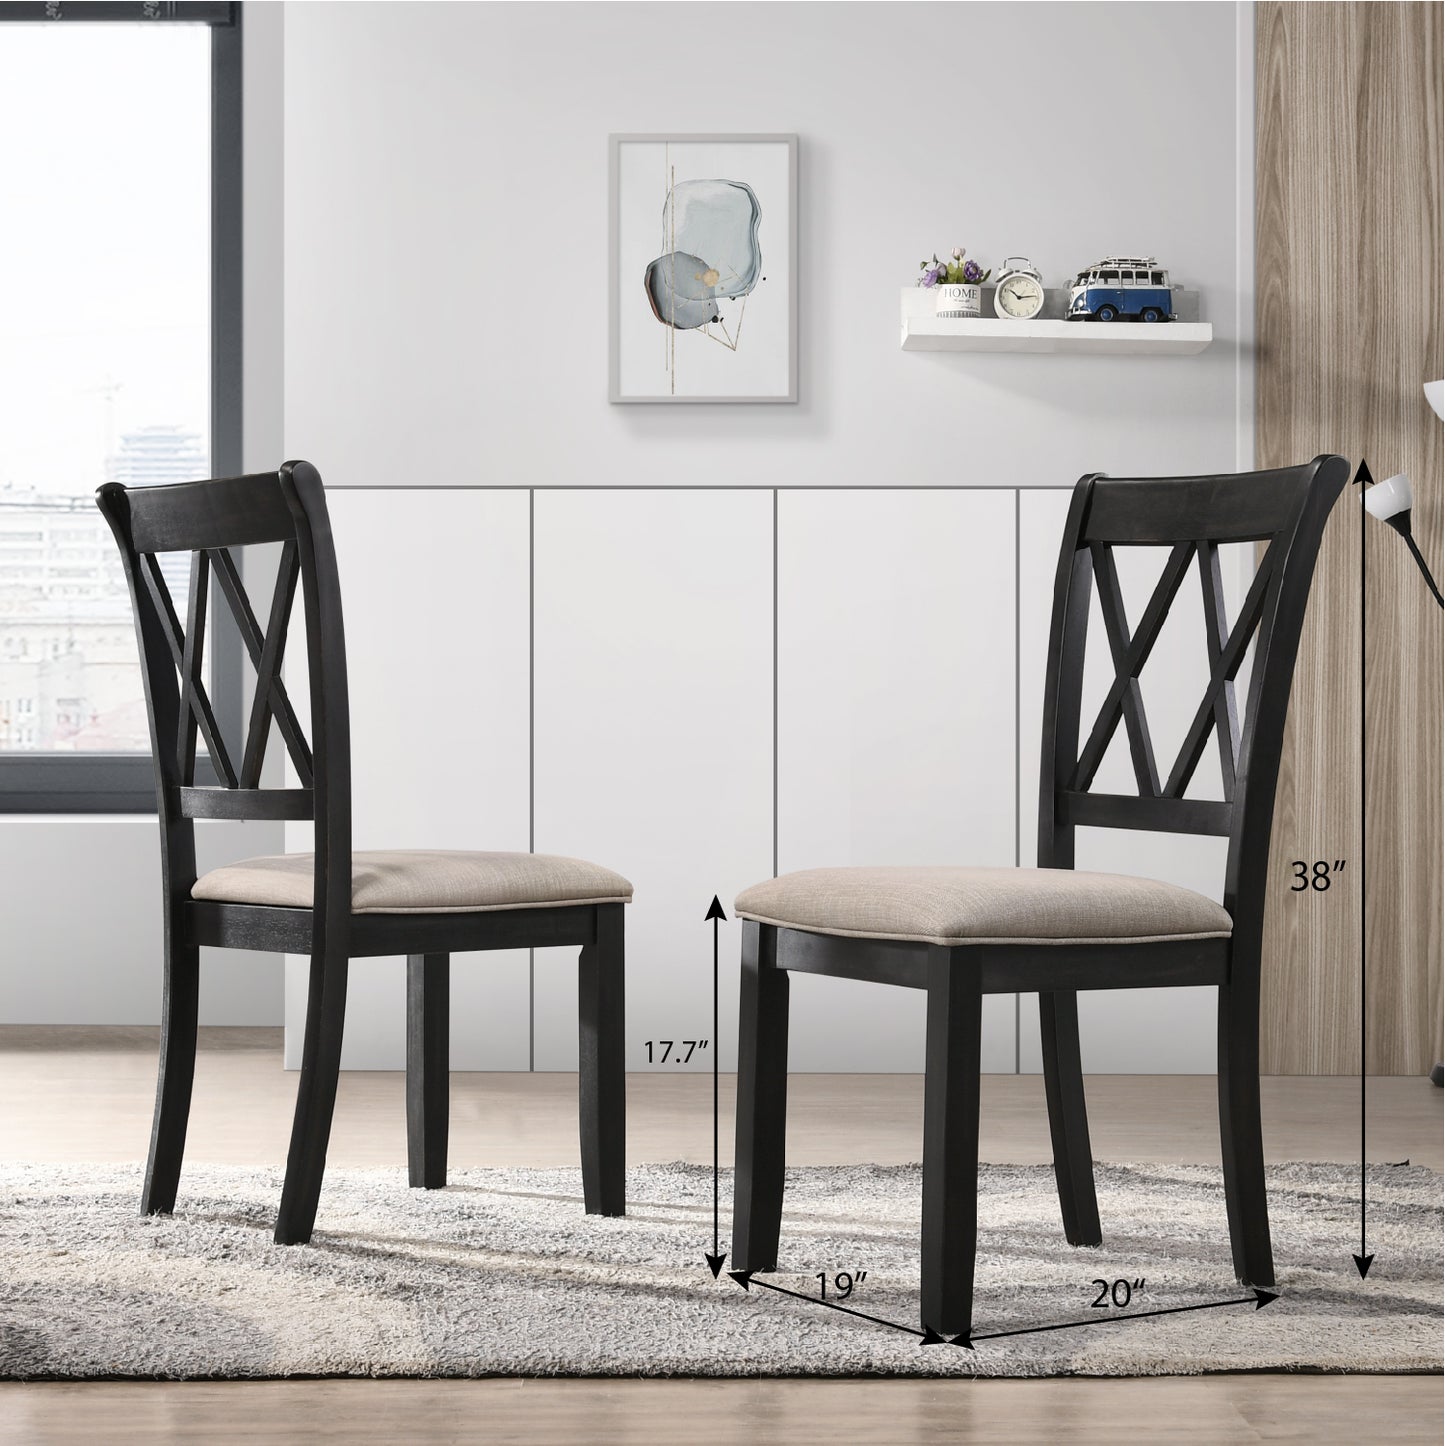 Arroyo 5-Piece Dining Set, Hairpin Dining Table with 4 Cross-back Chairs, Rich Black